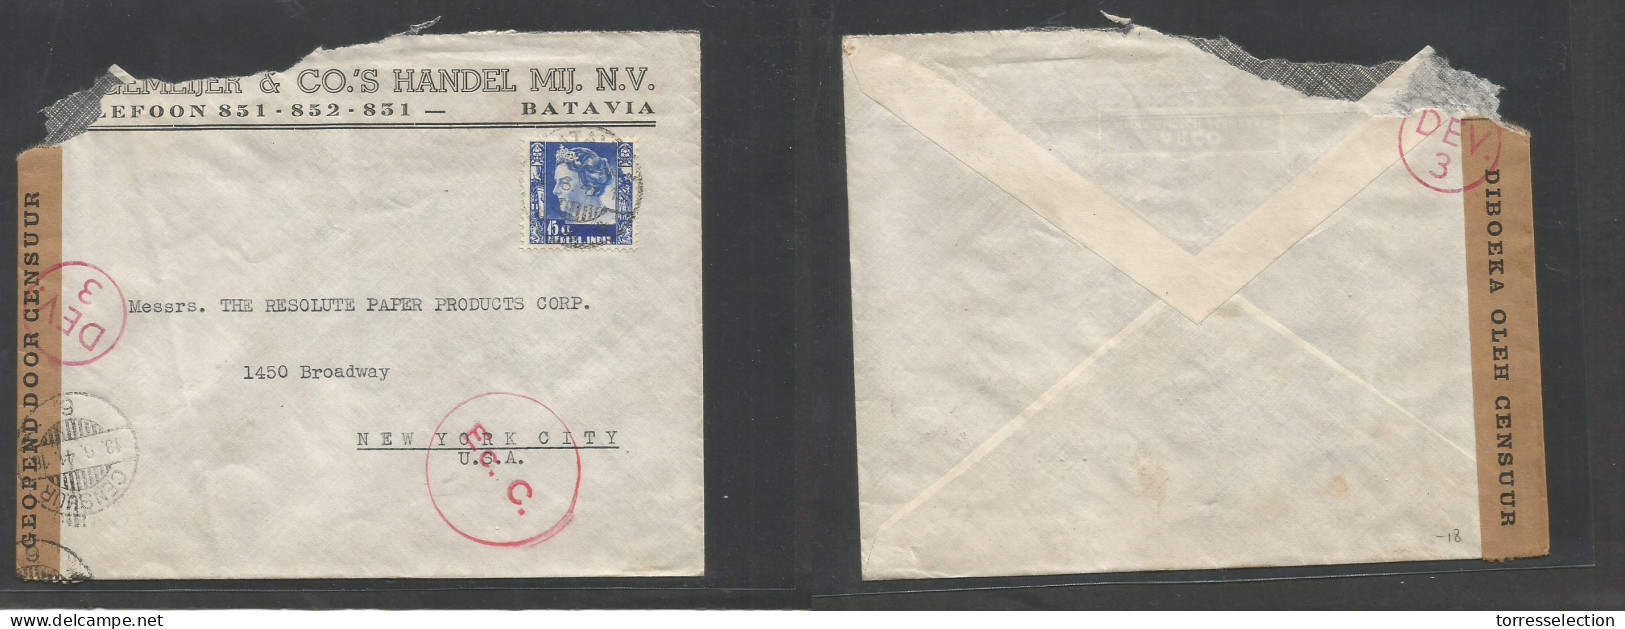 DUTCH INDIES. 1941 (11 June) Batavia - USA, NYC. 15c Fkd Censored Comercial Envelope. Pacific Routing. - Indonesië